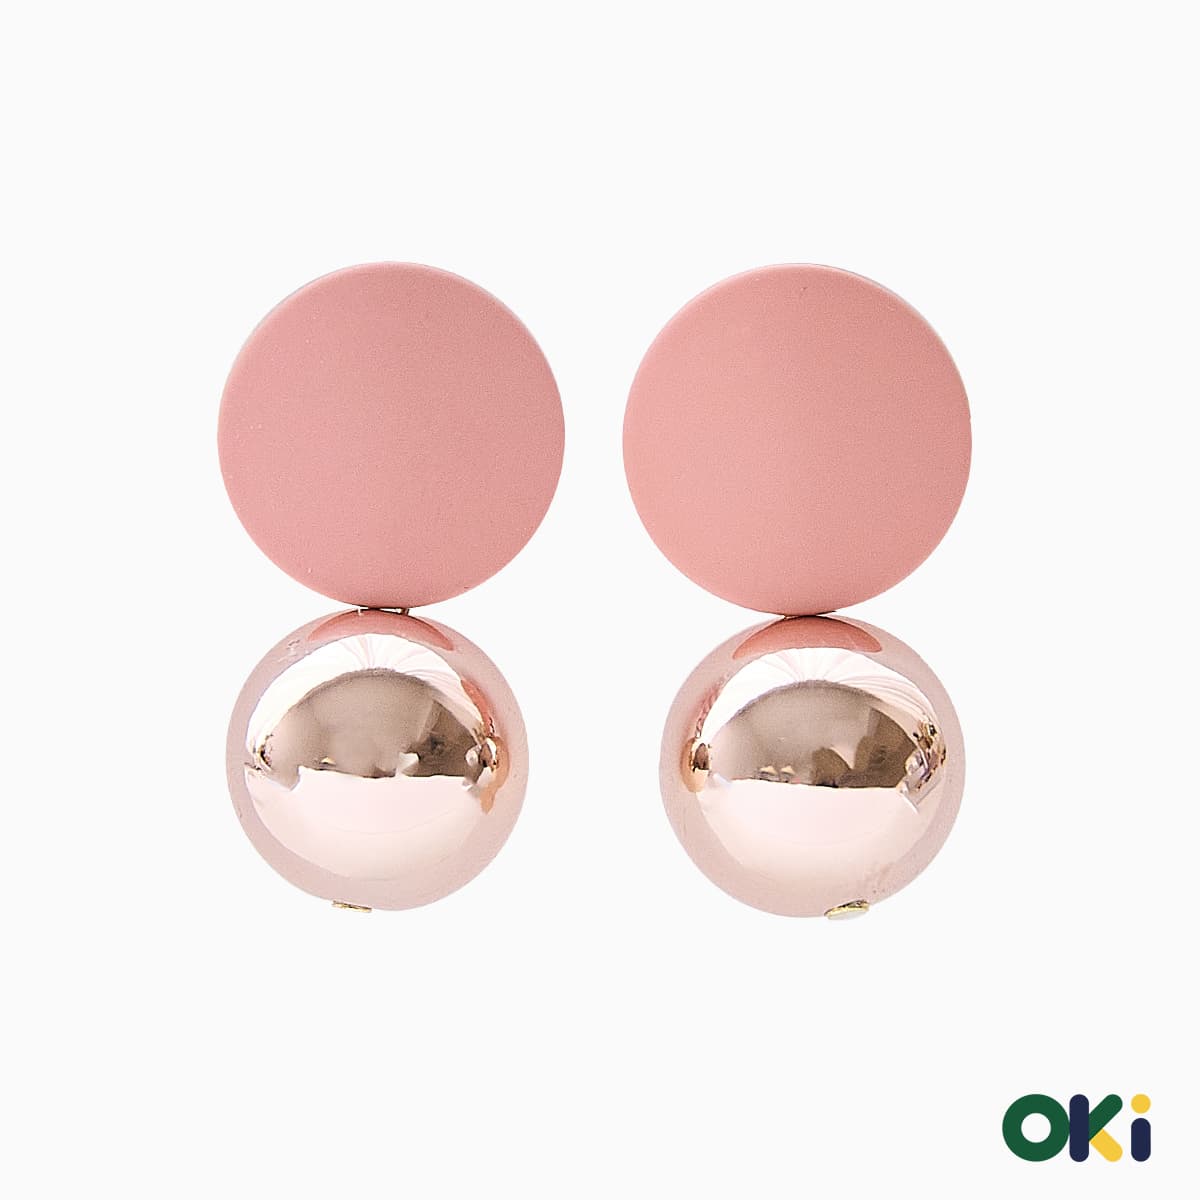 Pickvely earrings OKi Fashion accessories jewely hypoallergenic